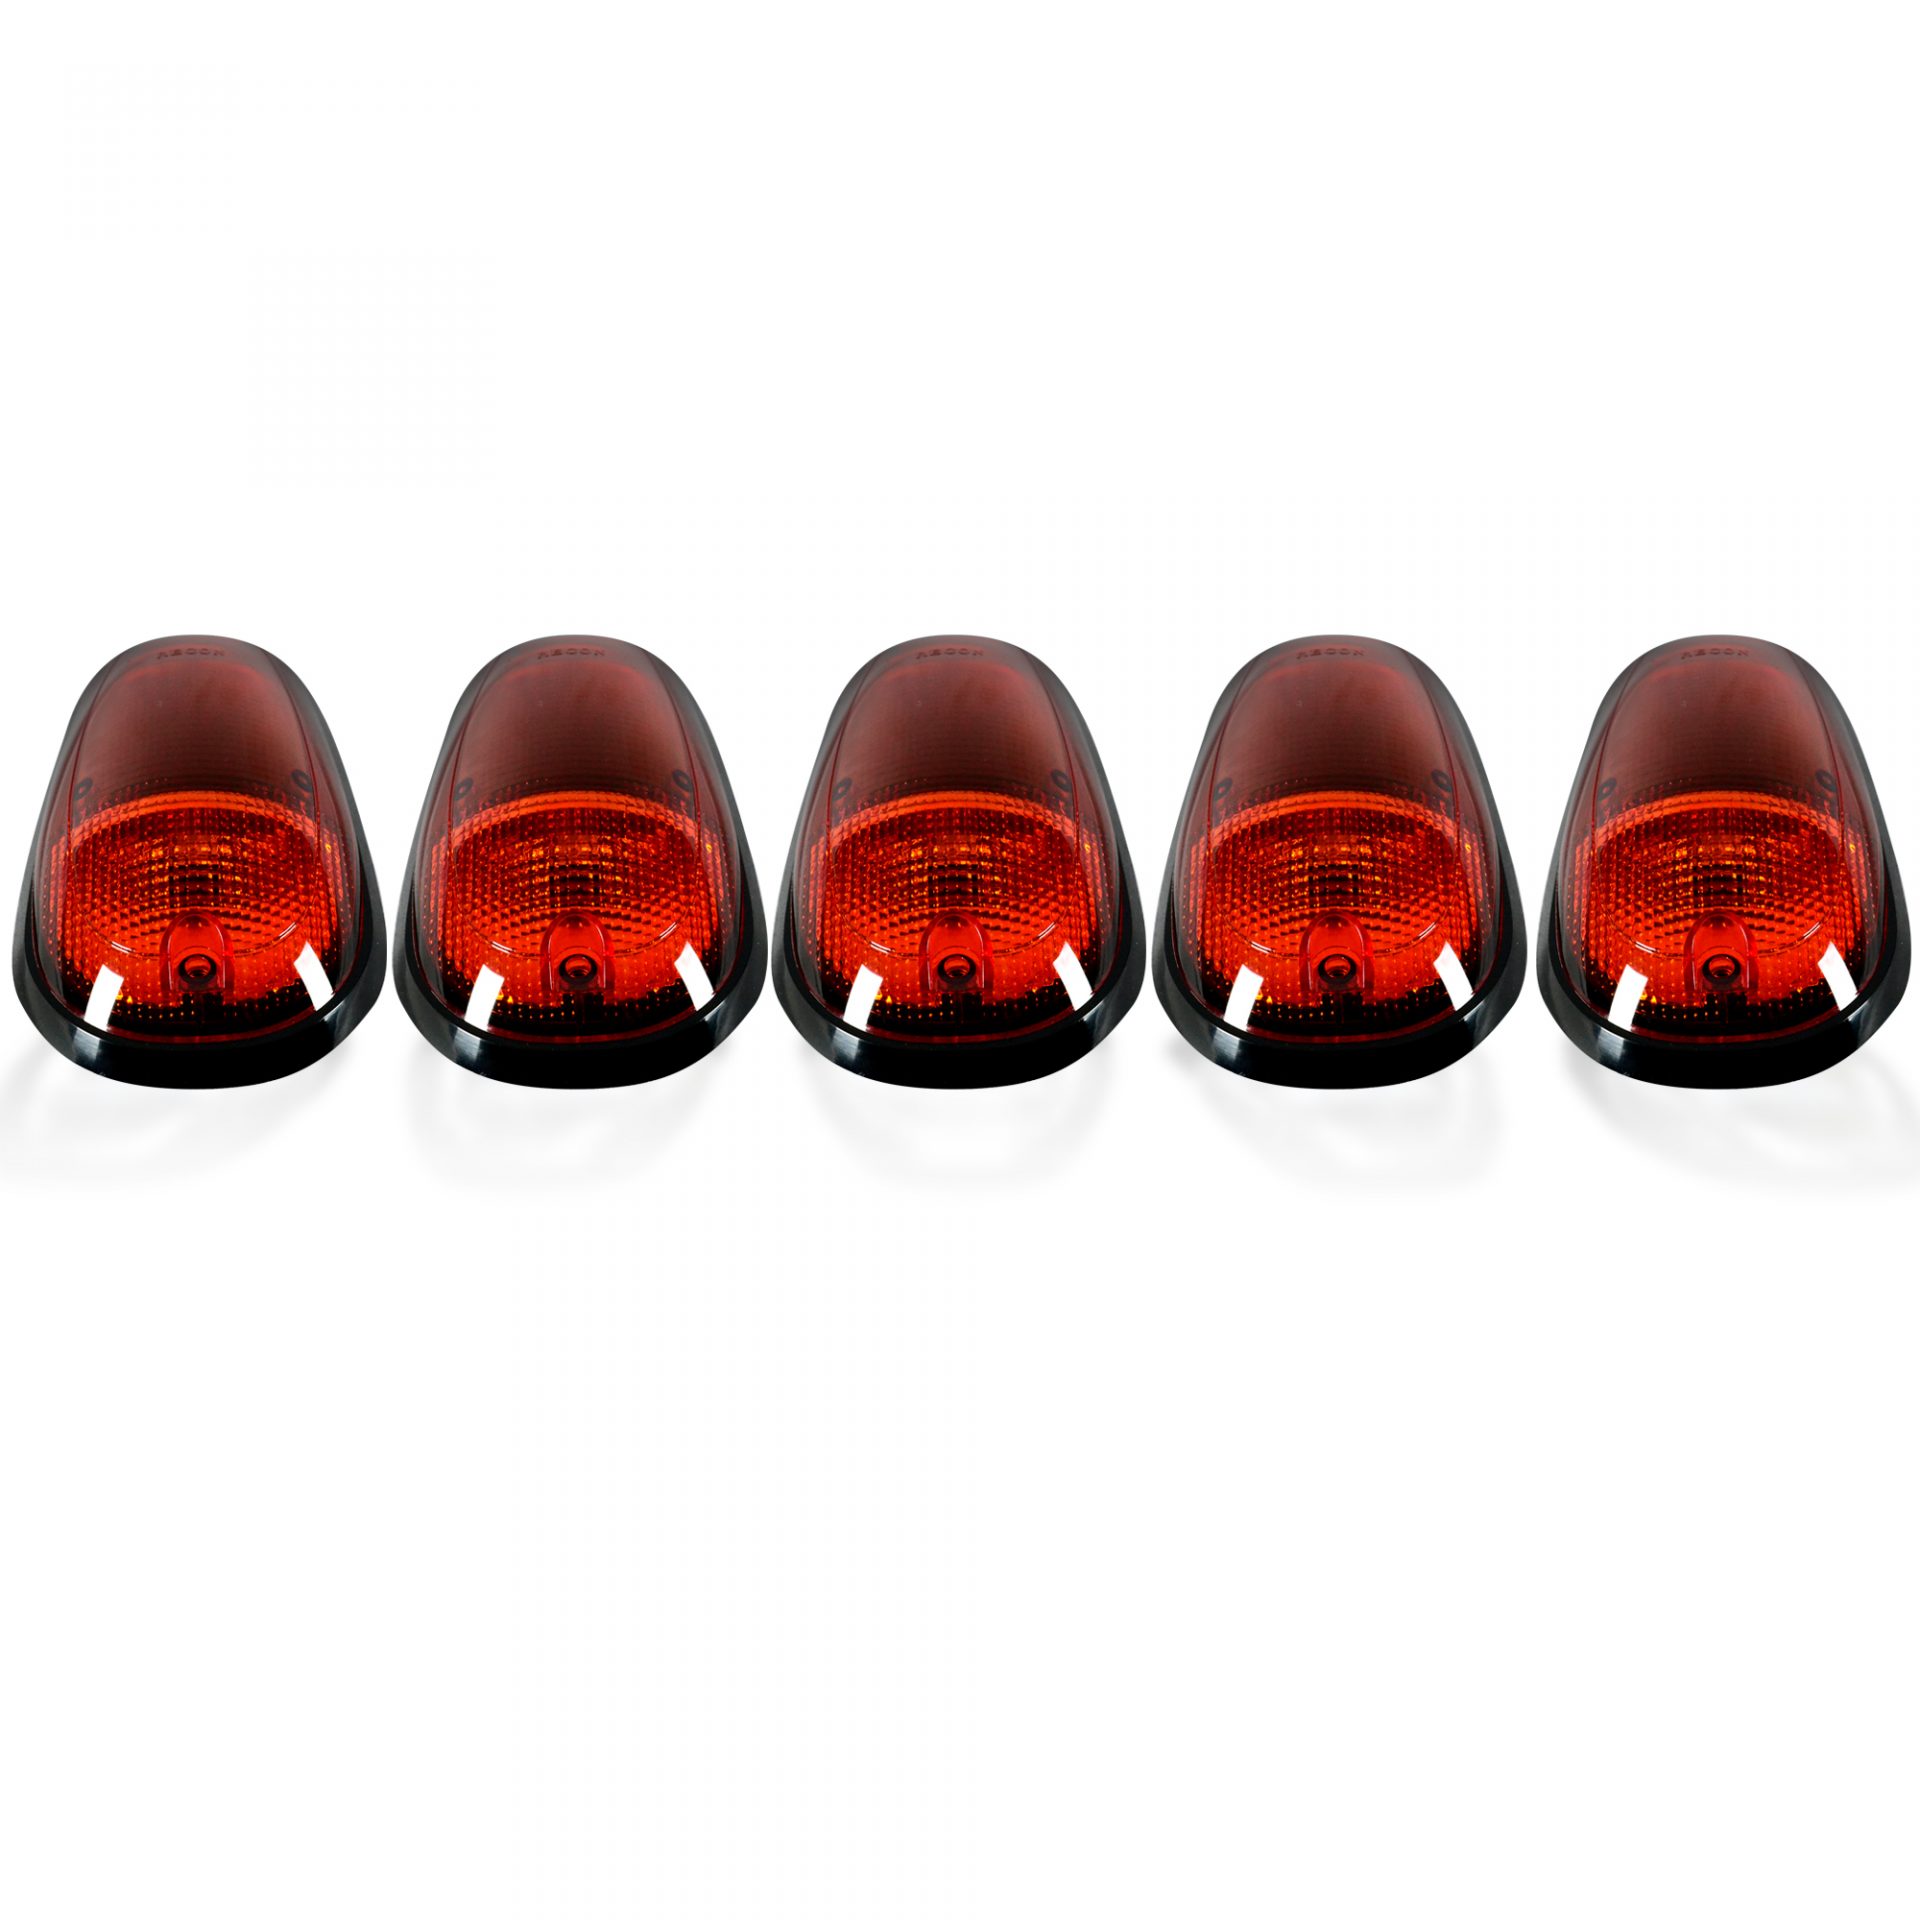 Dodge Heavy-Duty 2500/3500 03-19 5 Piece Cab Roof Lights LED Amber Lens in Amber